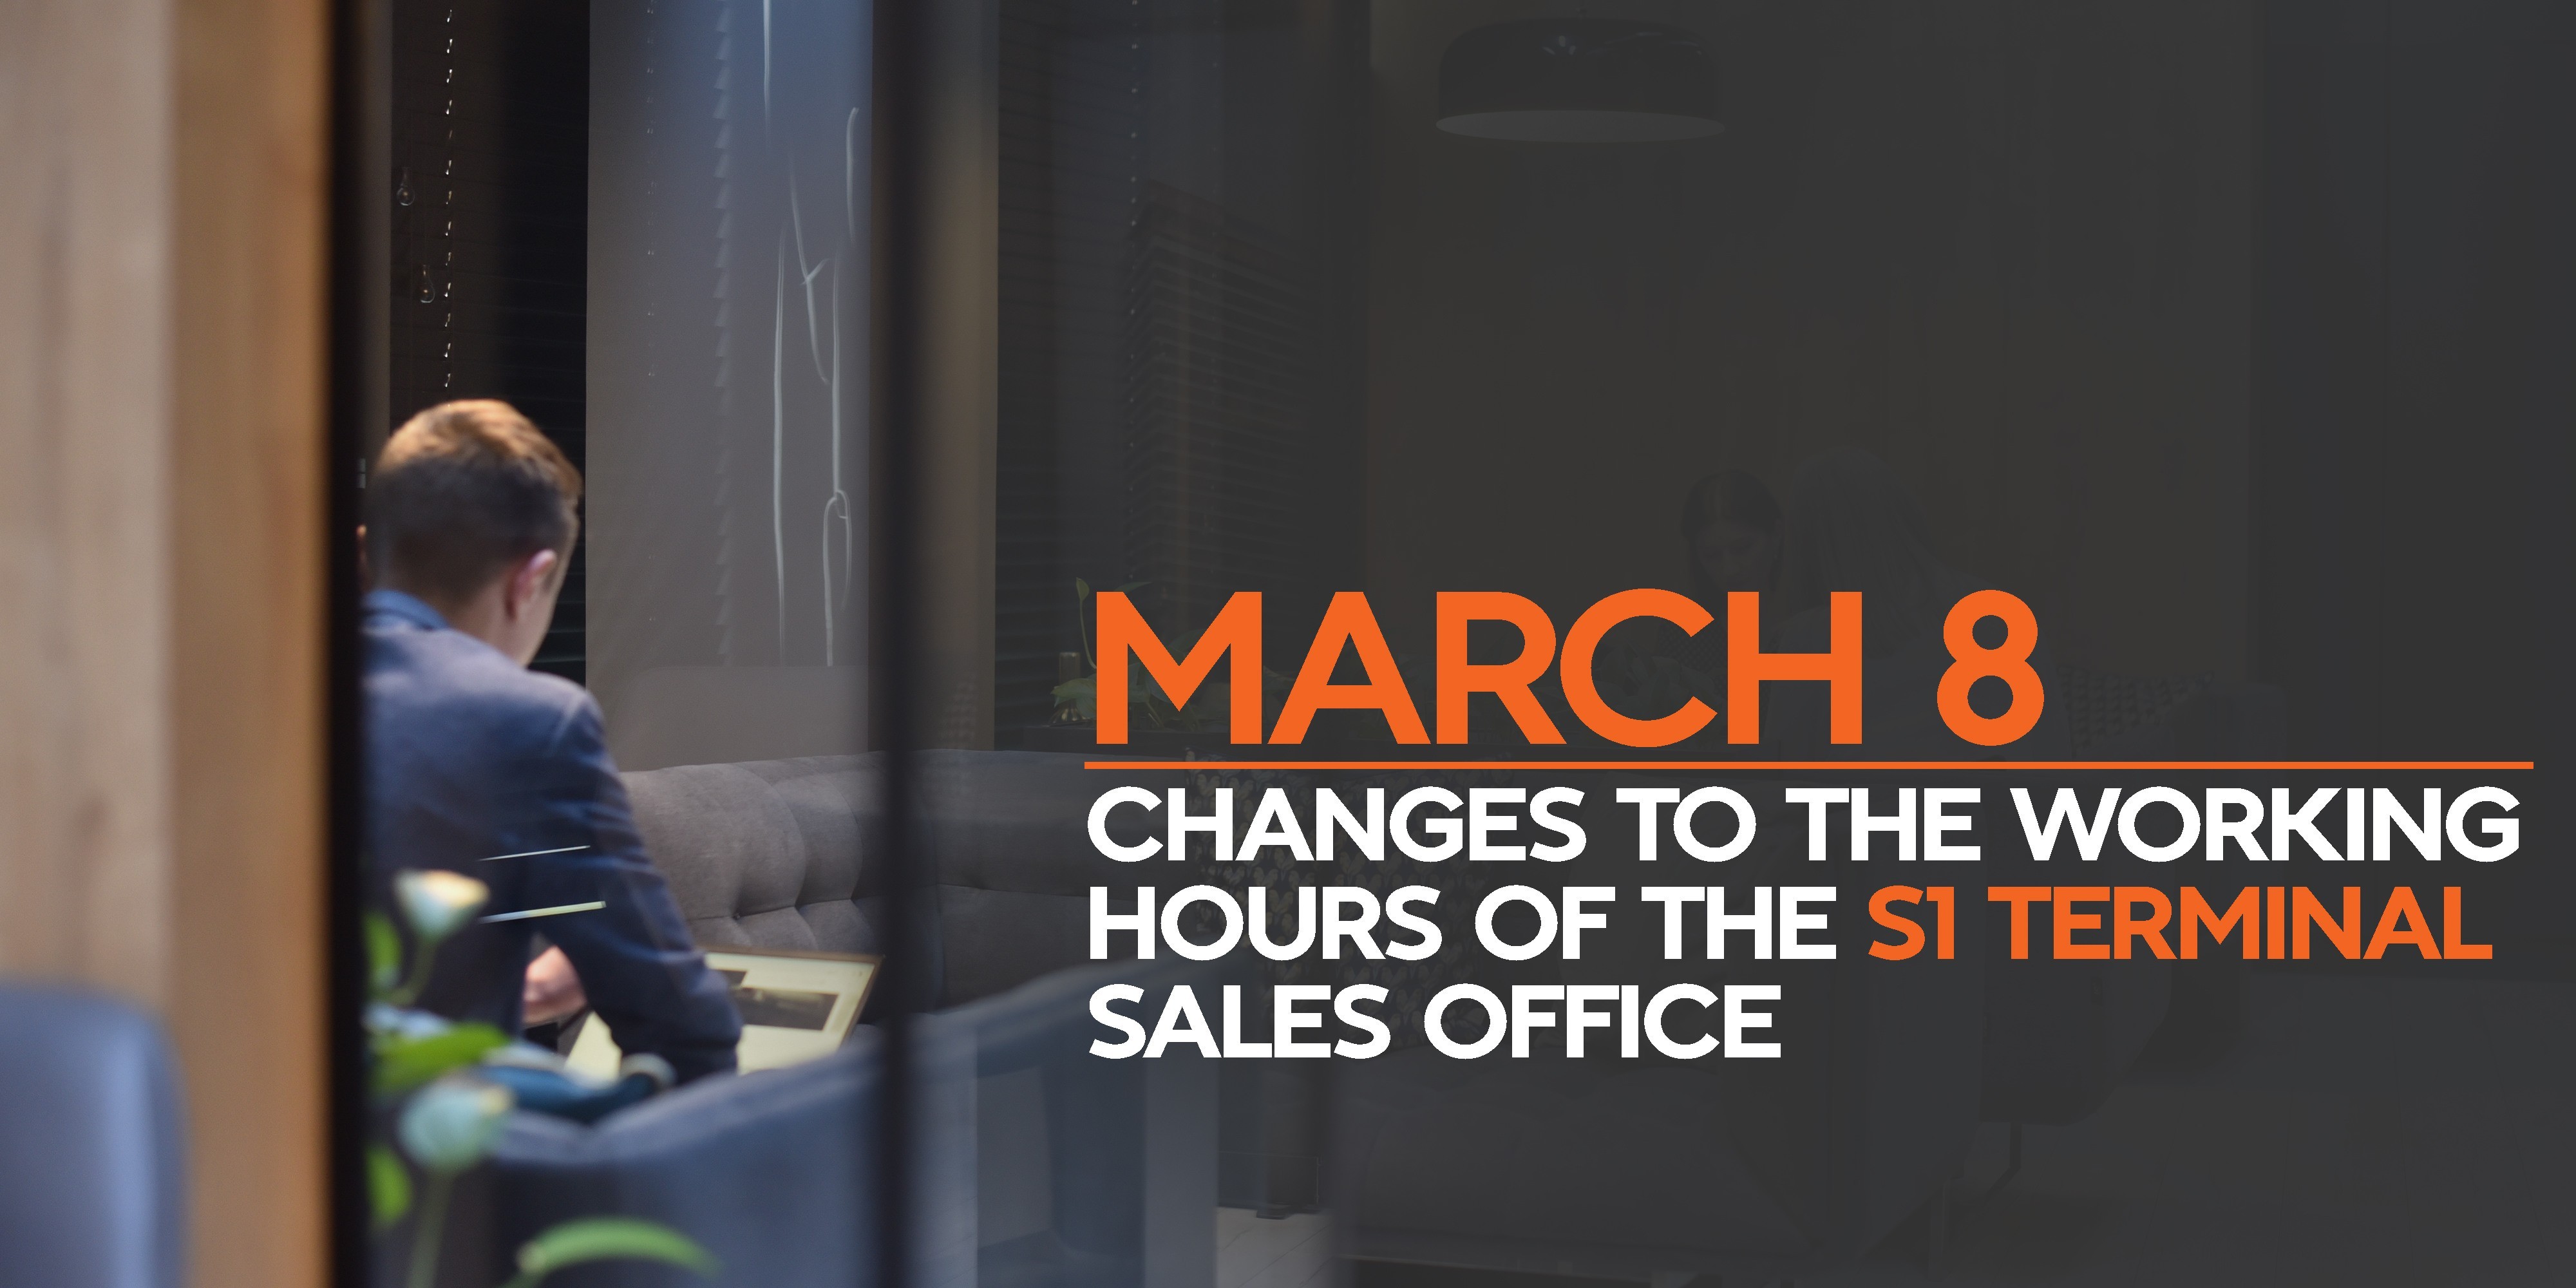 March 8: CHANGES TO THE WORKING HOURS OF THE S1 TERMINAL SALES OFFICE